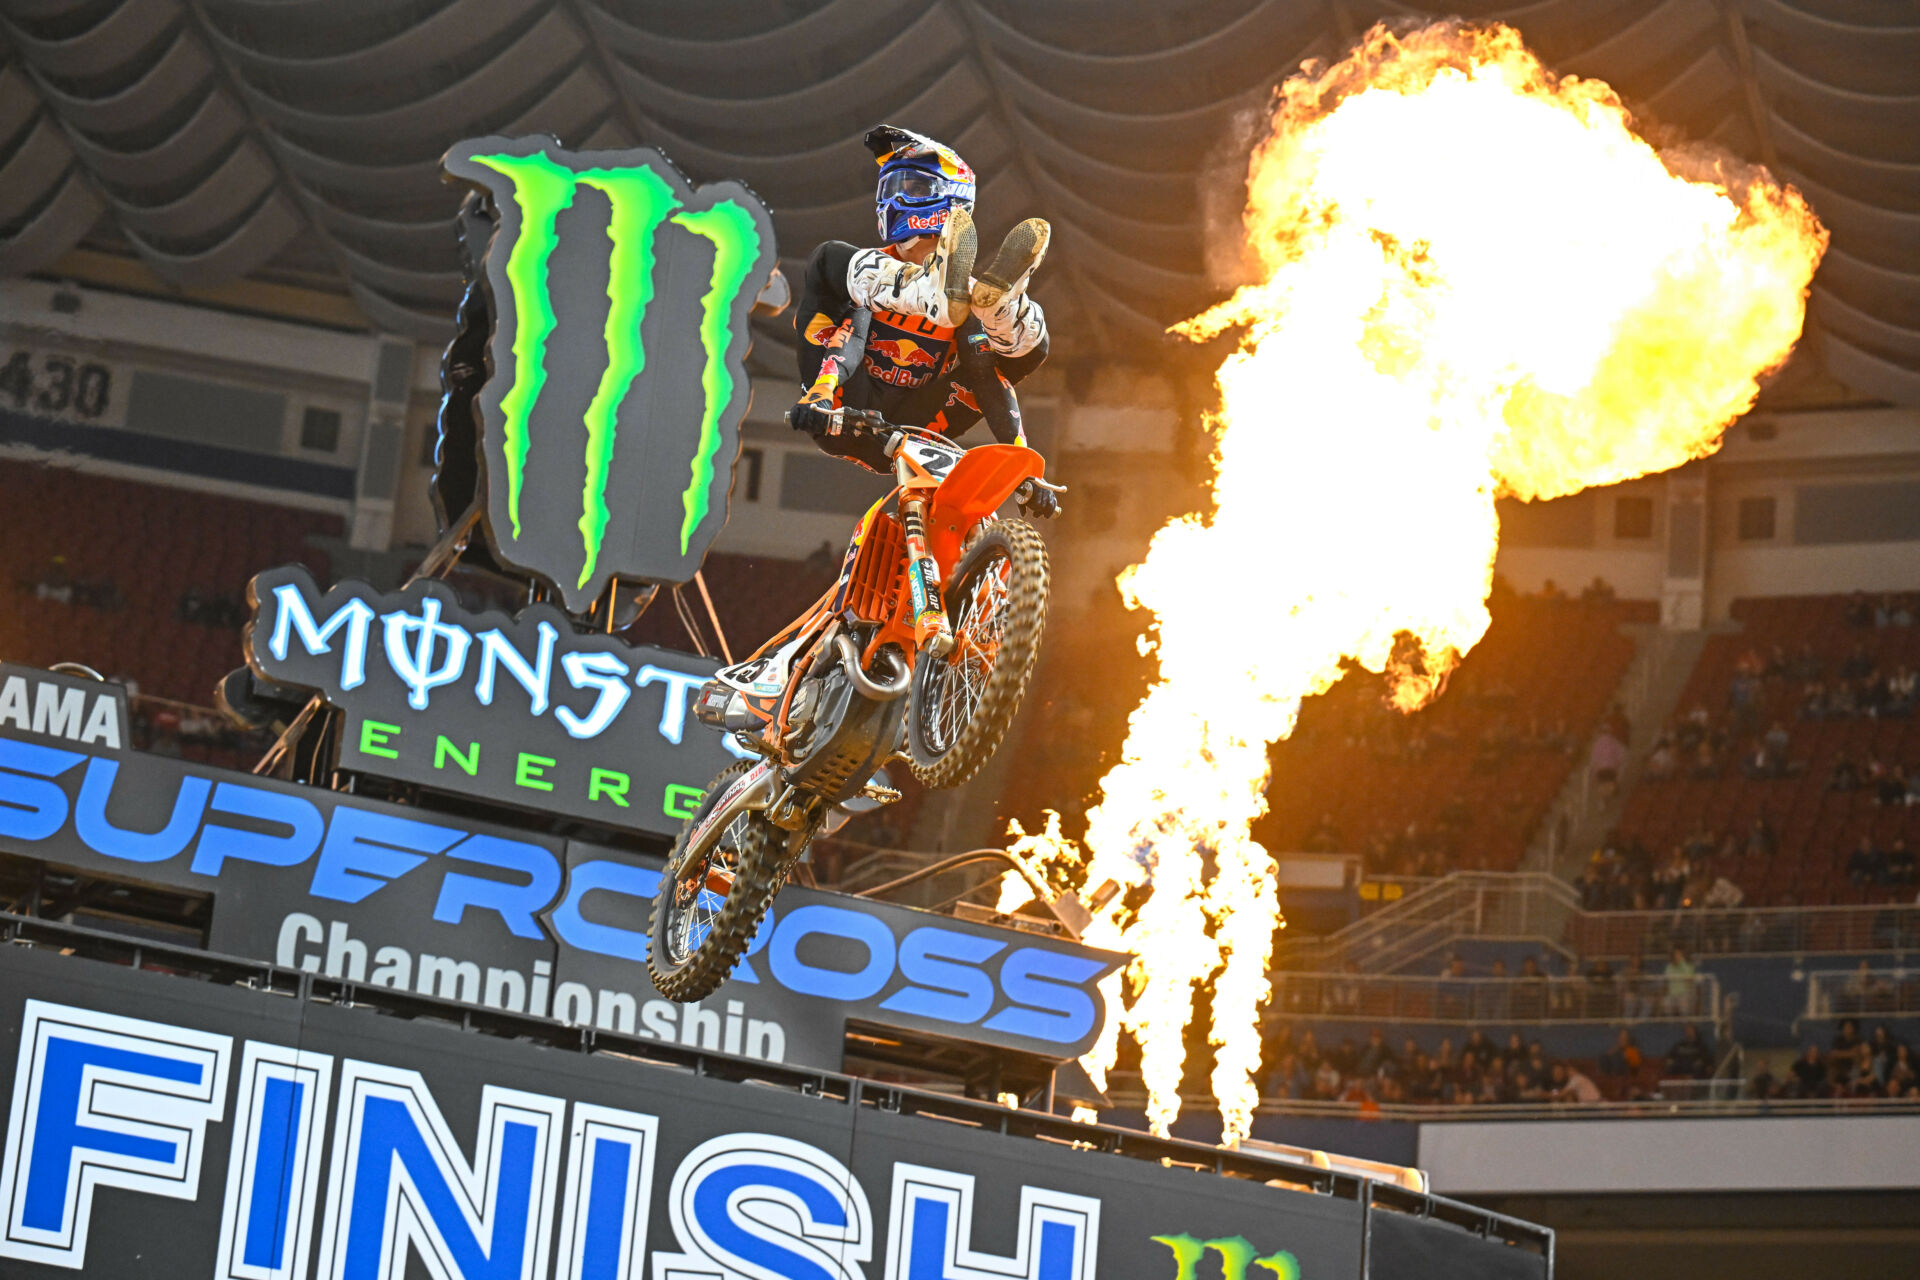 Red Bull KTM Factory Racing’s Marvin Musquin (25) celebrating his Supercross race victory in St. Louis earlier in 2022. Photo by Align Media, courtesy KTM North America.